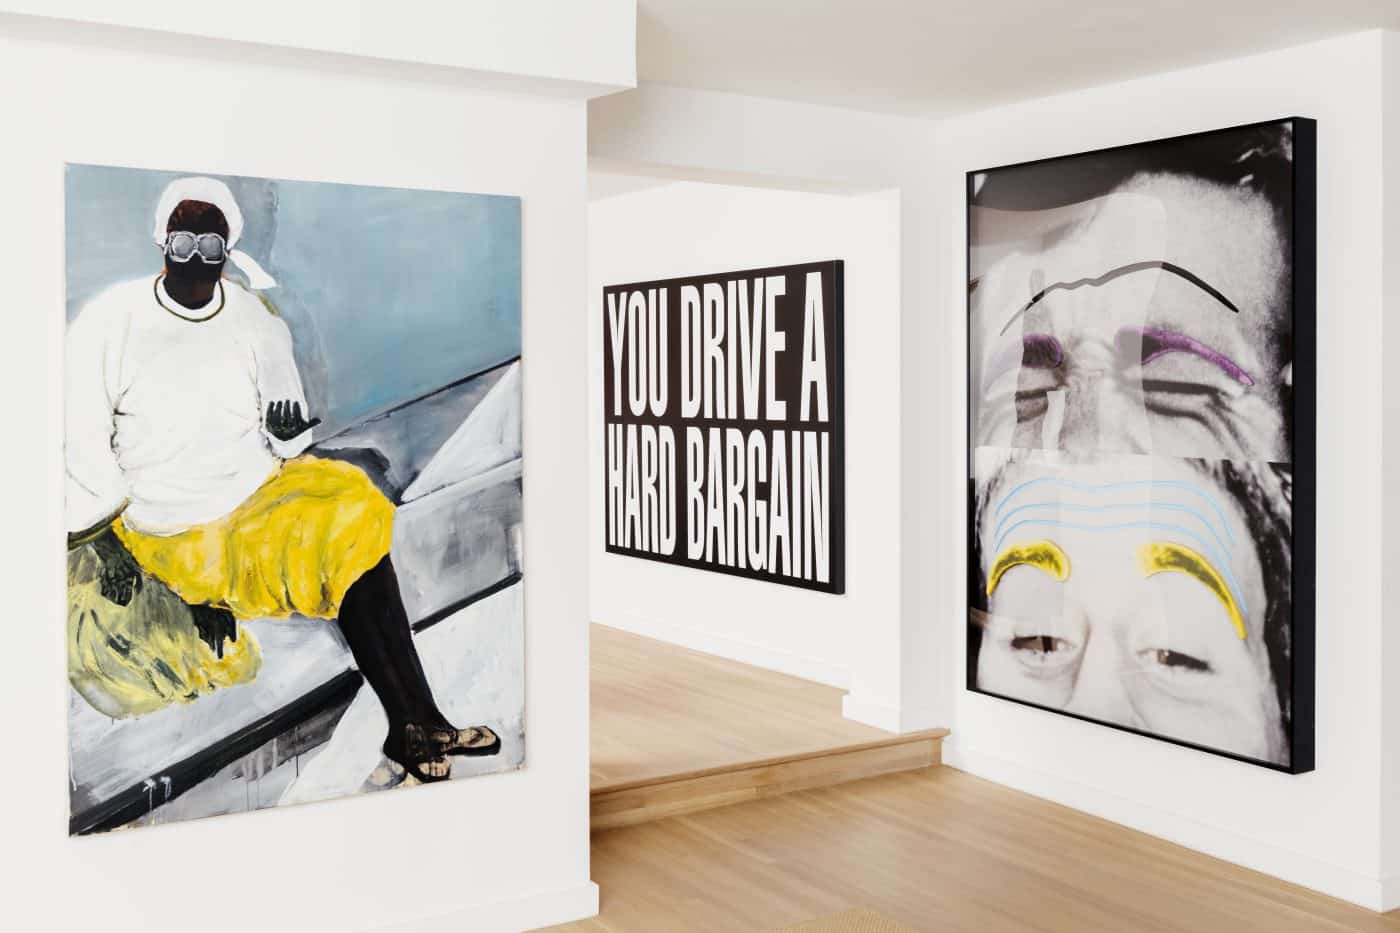 Keith Rivers art collection: From left: Untitled, 2017, by Arjan Martin; Untitled (You drive a hard bargain), 2011; and Raised Eyebrows and Furrowed Foreheads, 2008, by JOHN BALDESSARI